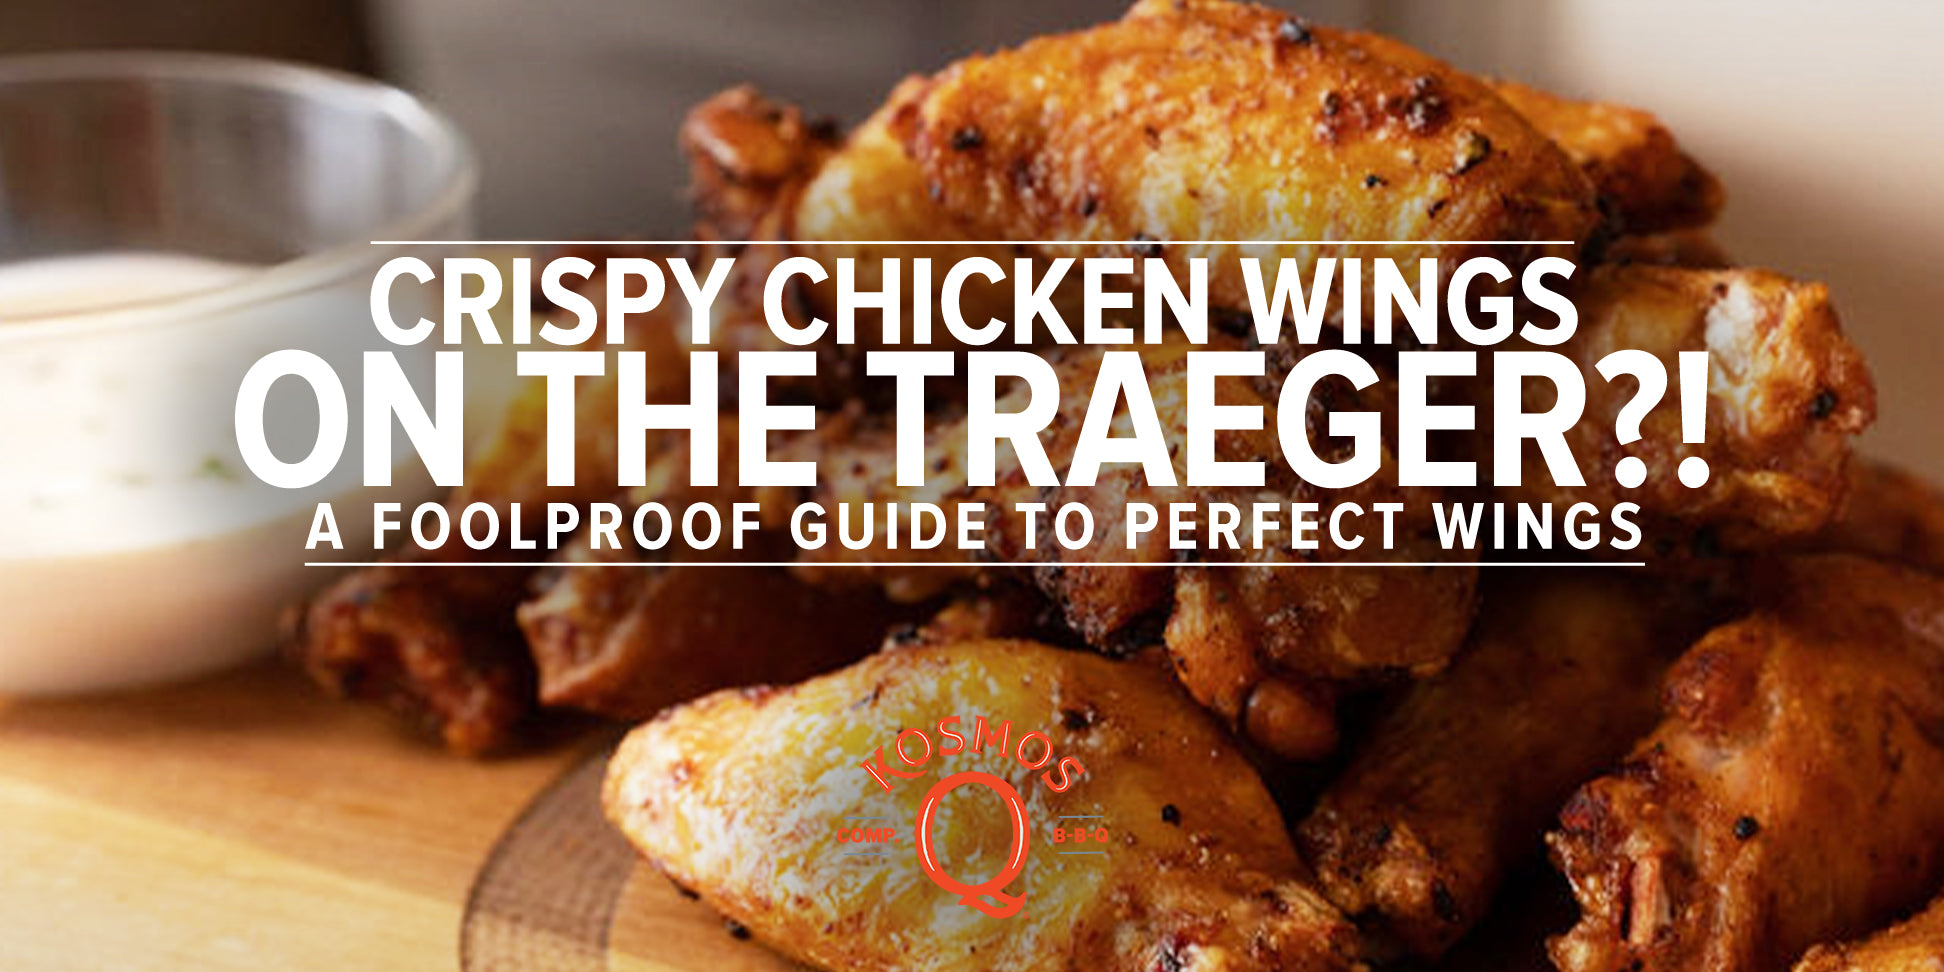 How to Make Crispy Chicken Wings ... On The Traeger?!